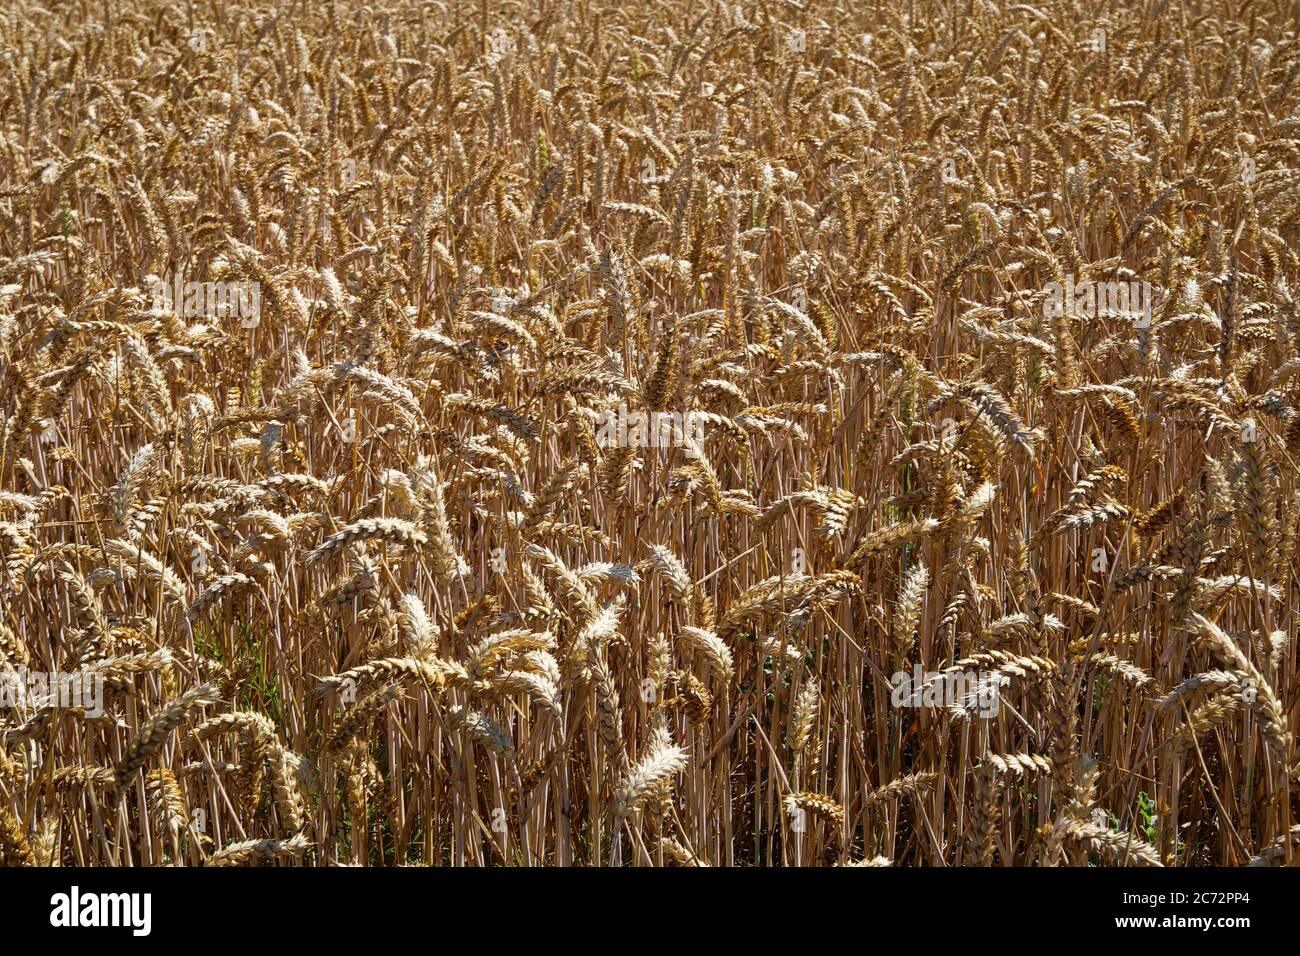 View into shiny wheat field in the early morning sun - Germany Stock Photo